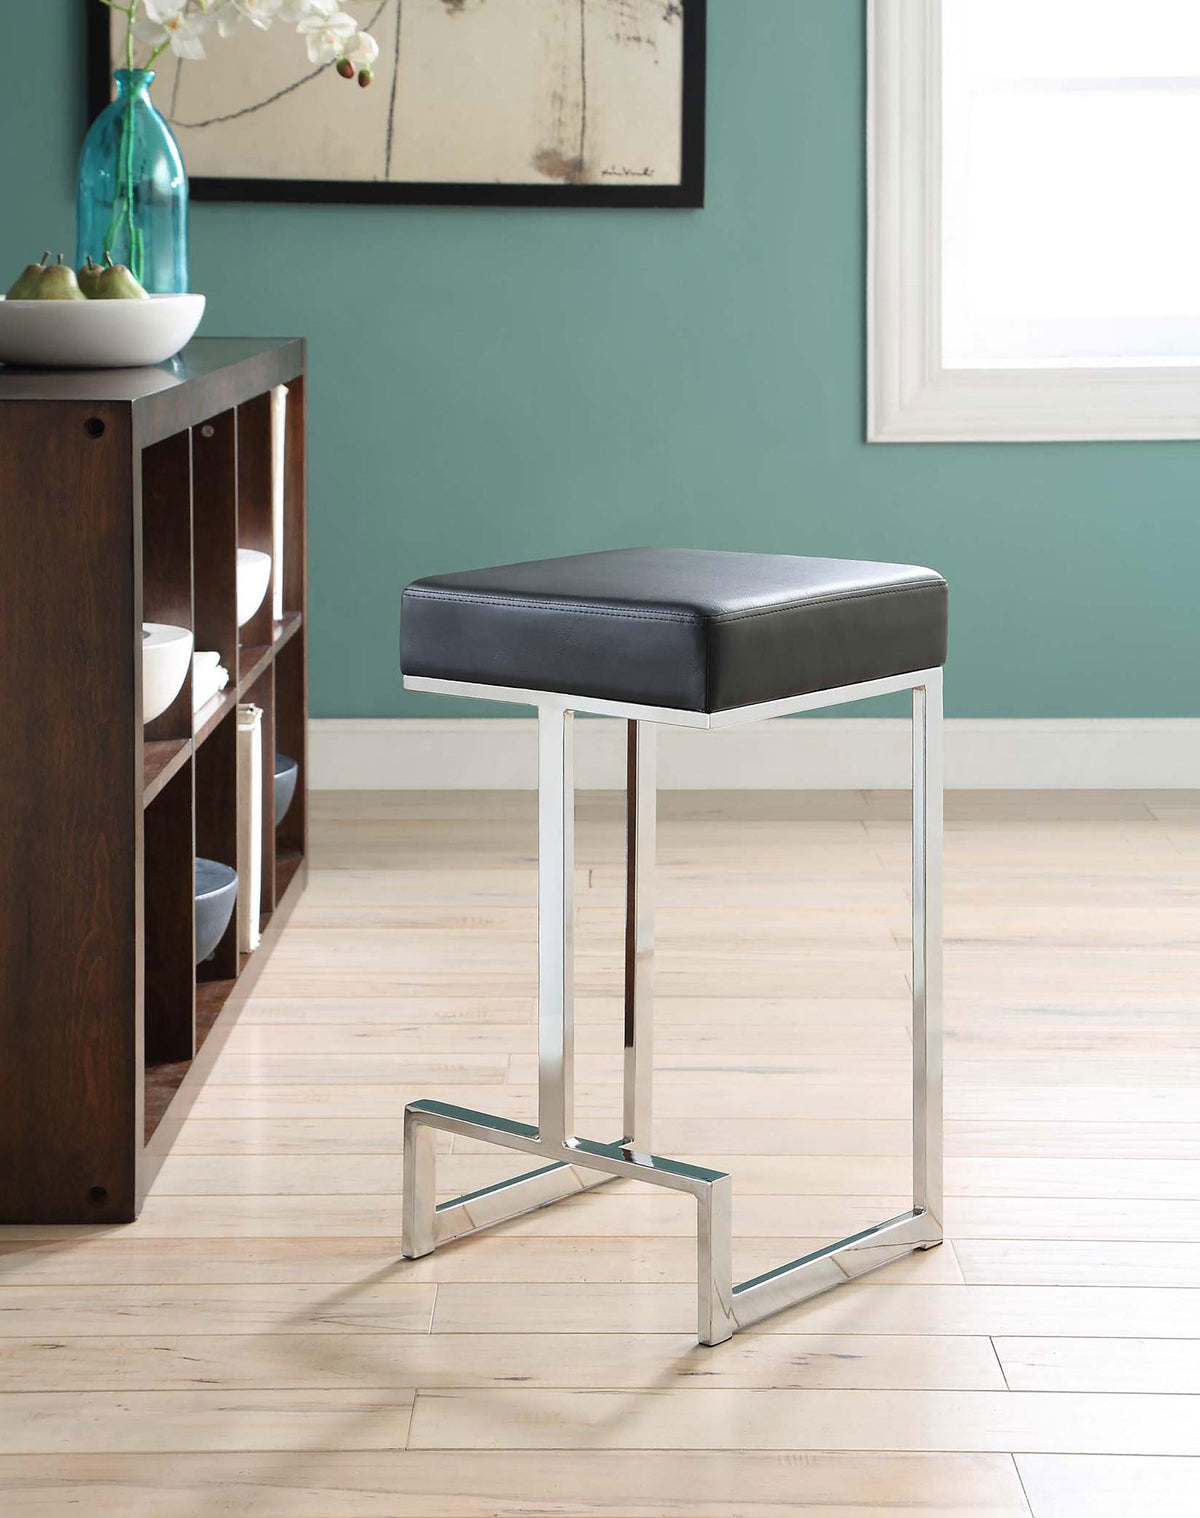 Gervase Square Counter Height Stool Black and Chrome Gervase Square Counter Height Stool Black and Chrome Half Price Furniture